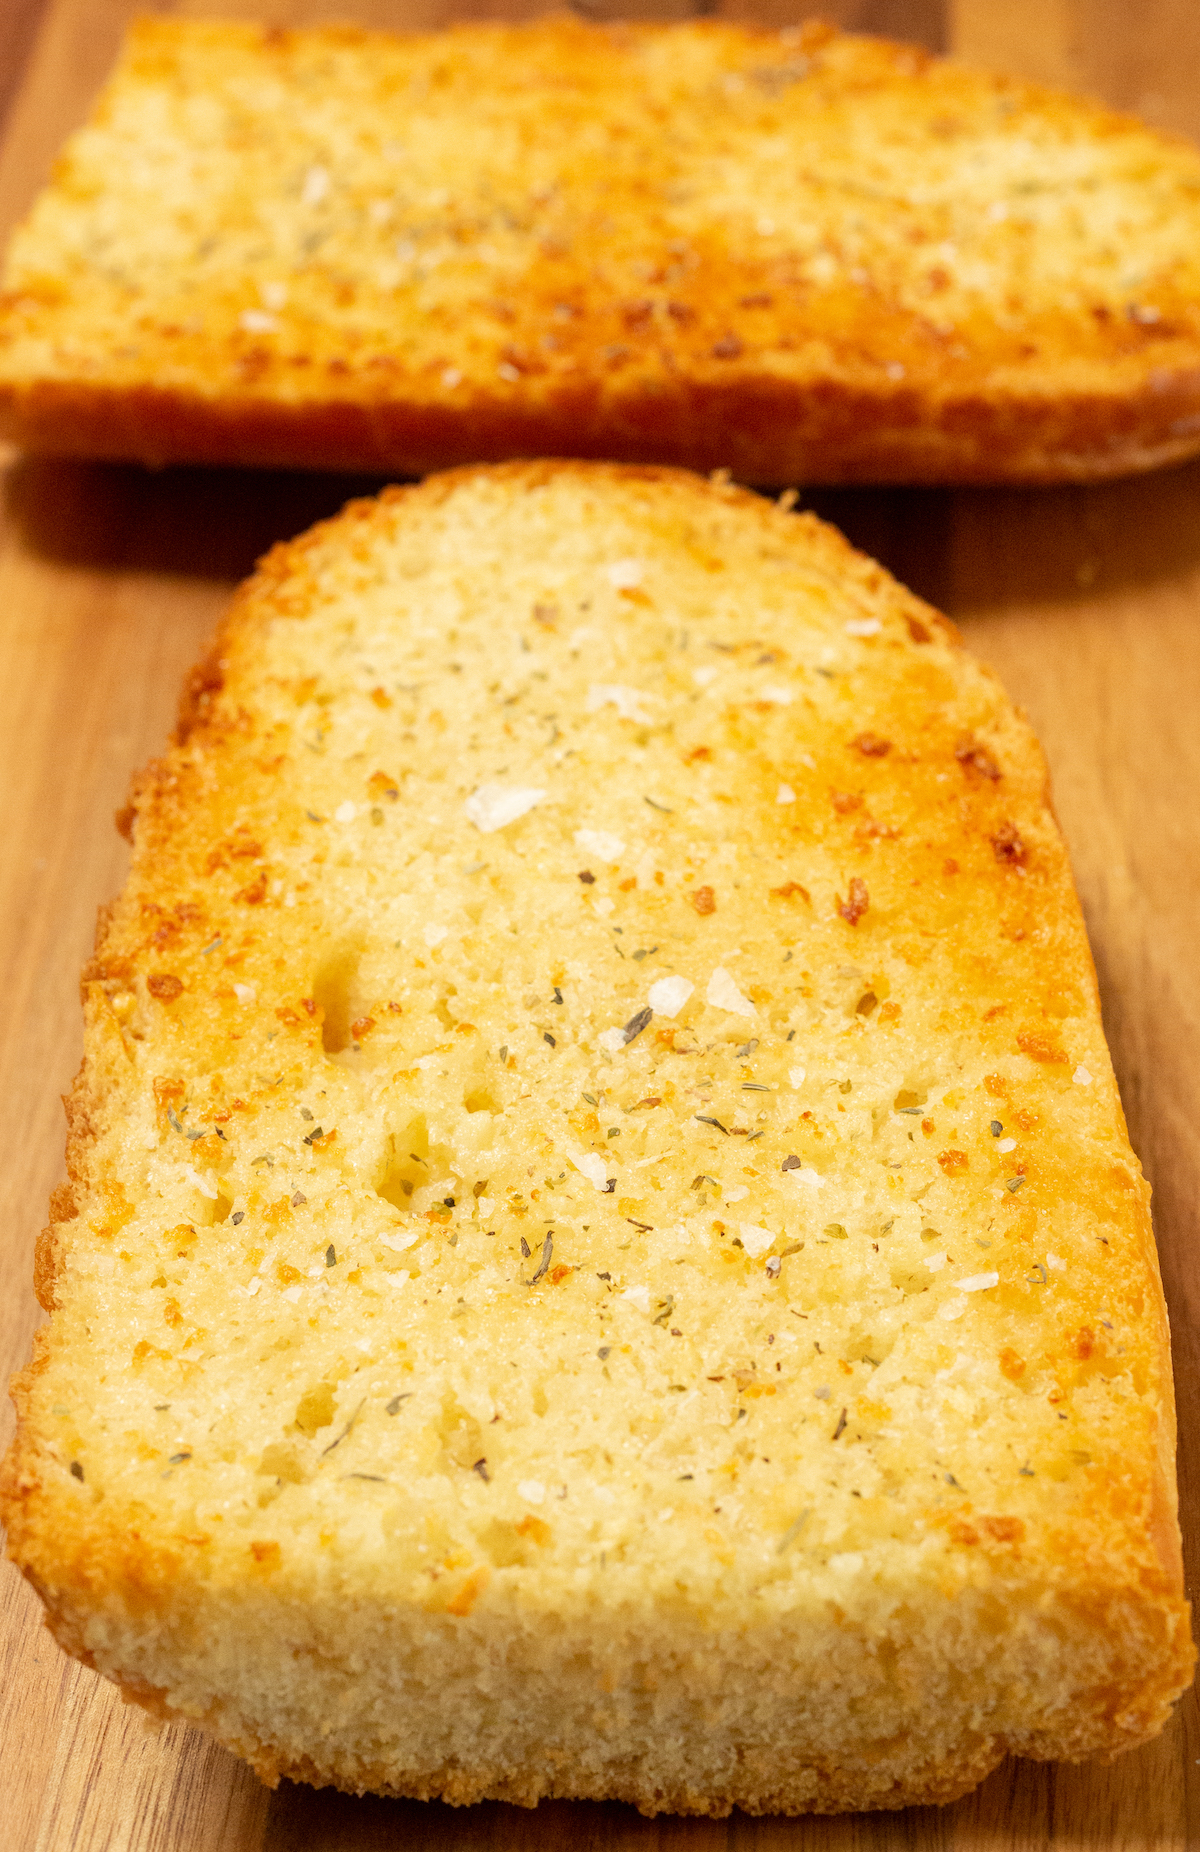 Two pieces of garlic bread made in the air fryer on a wood cutting board.